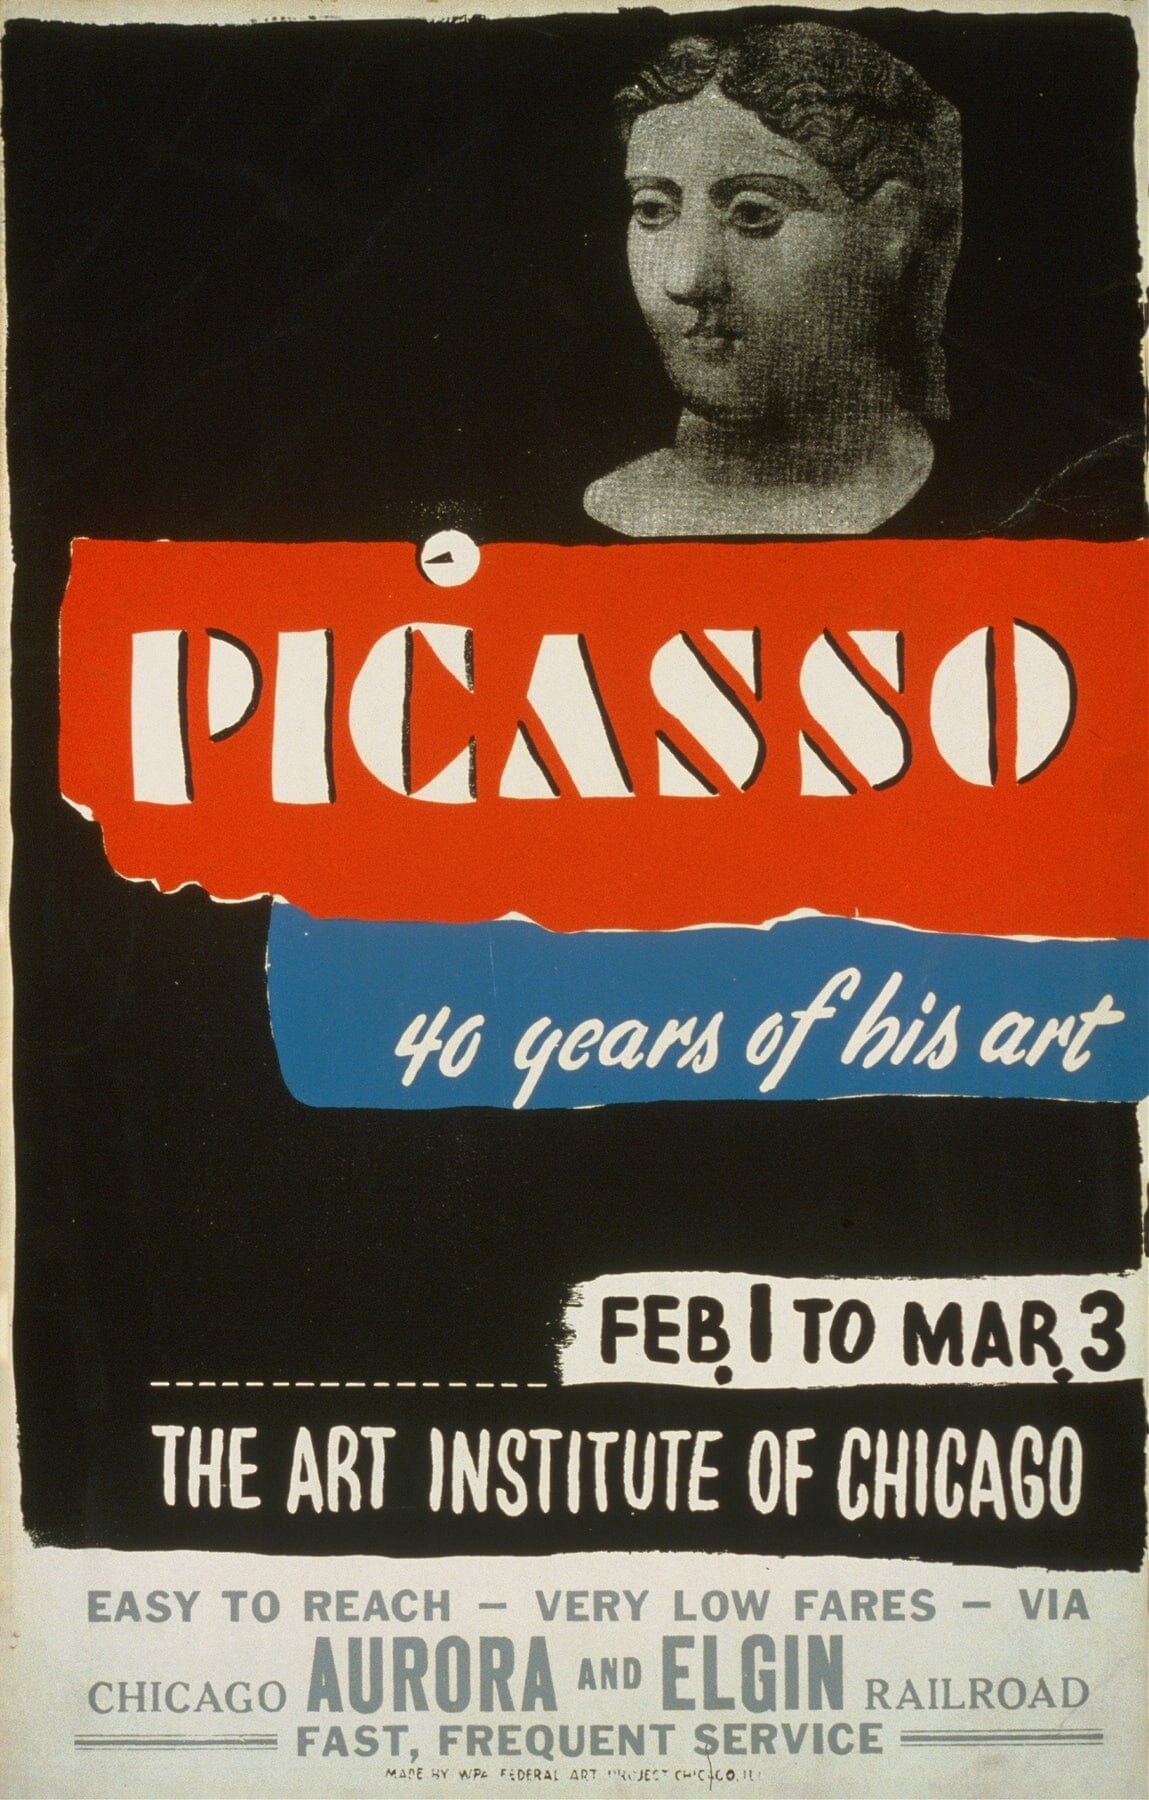 Pablo Picasso Exhibition Poster, Chicago (1930s) | 1930s wall art Posters, Prints, & Visual Artwork The Trumpet Shop   